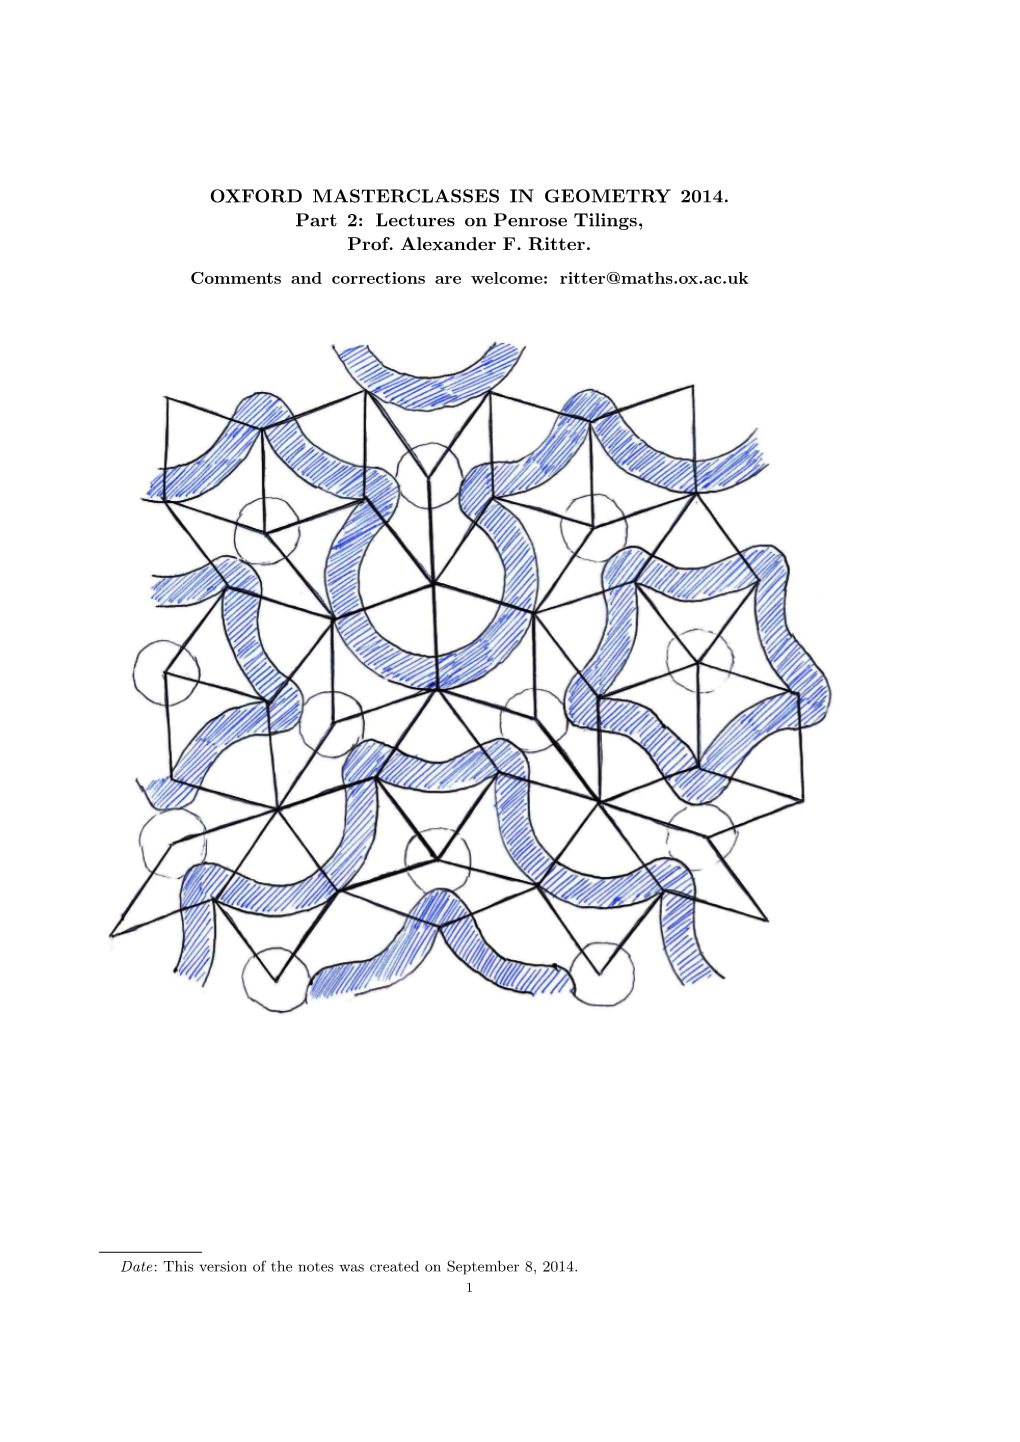 Lectures on Penrose Tilings, Prof